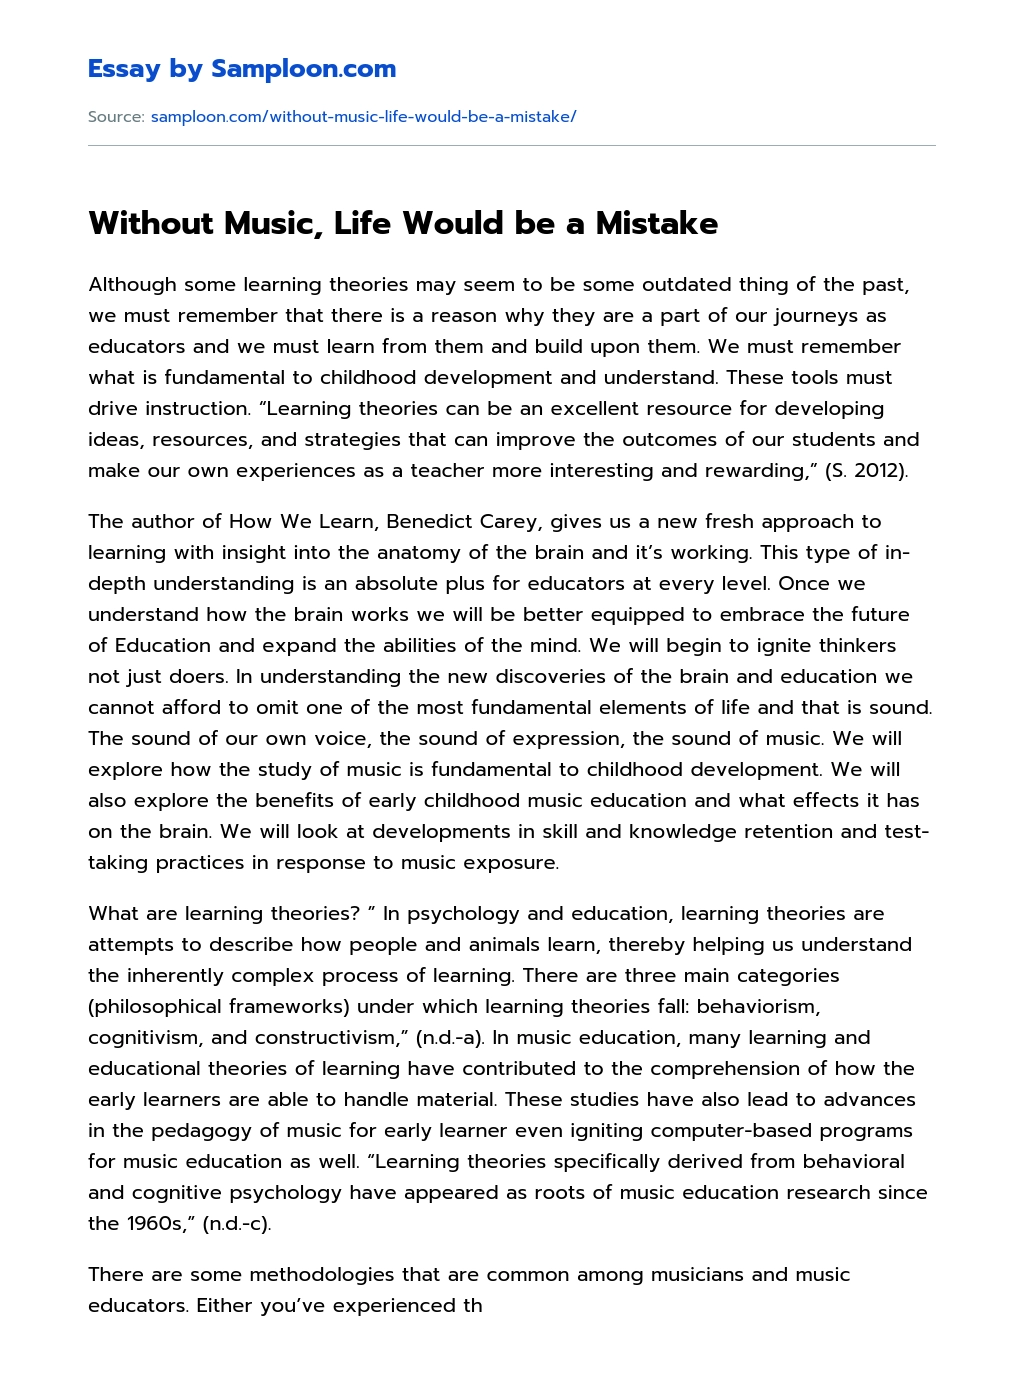 Without Music, Life Would be a Mistake essay